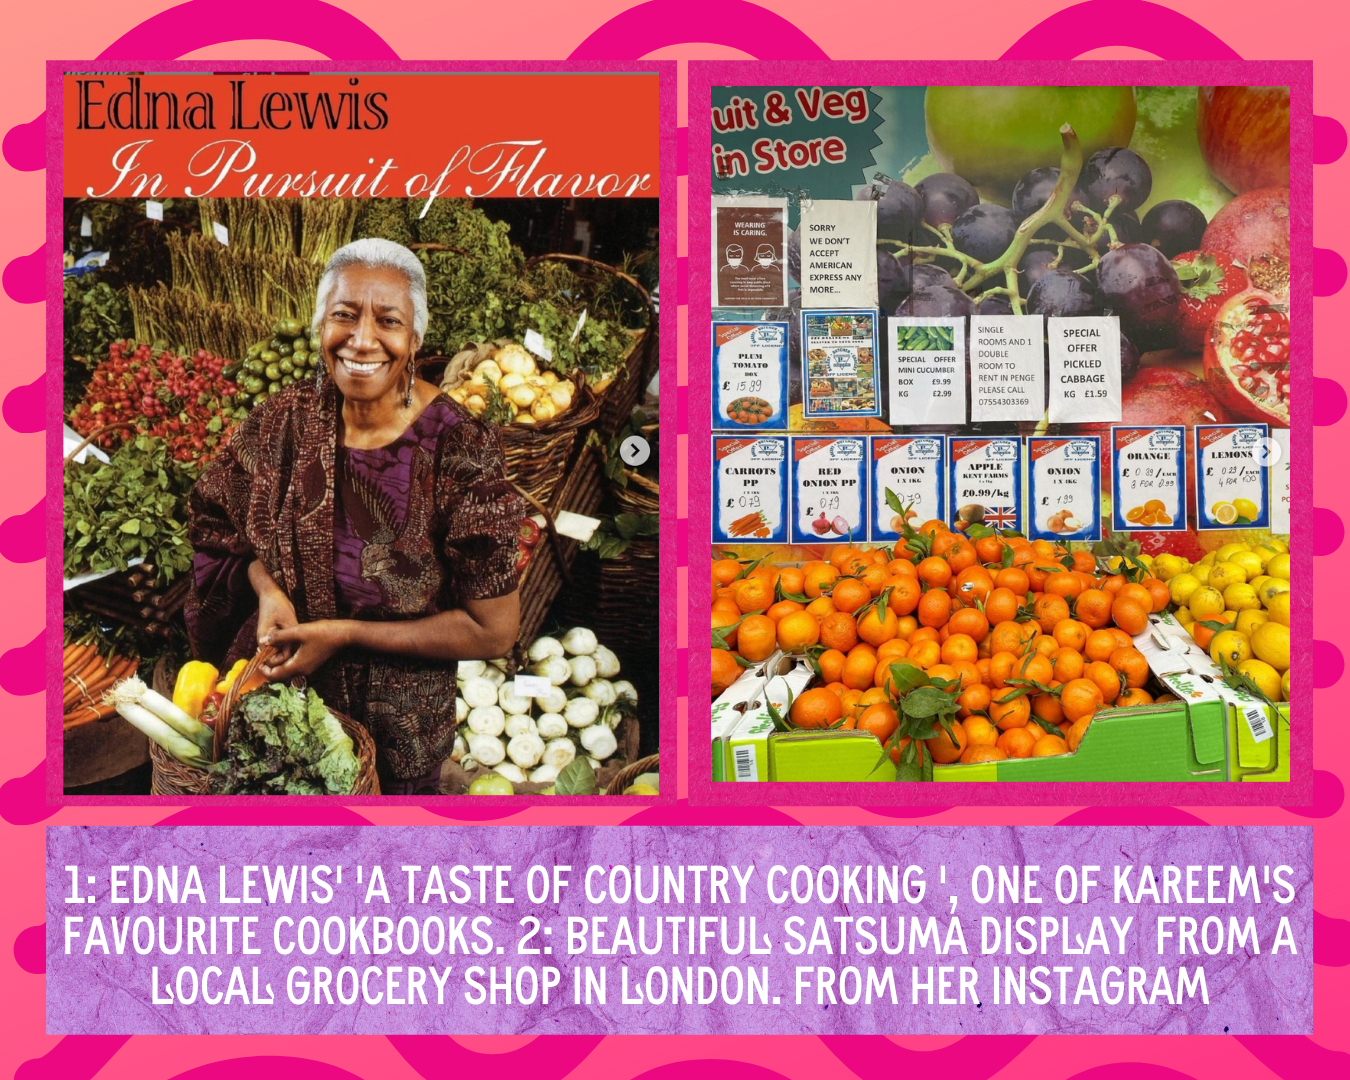 Edna Lewis 'A Taste of Country Cooking', Beautiful satsuma display from local grocery shop.